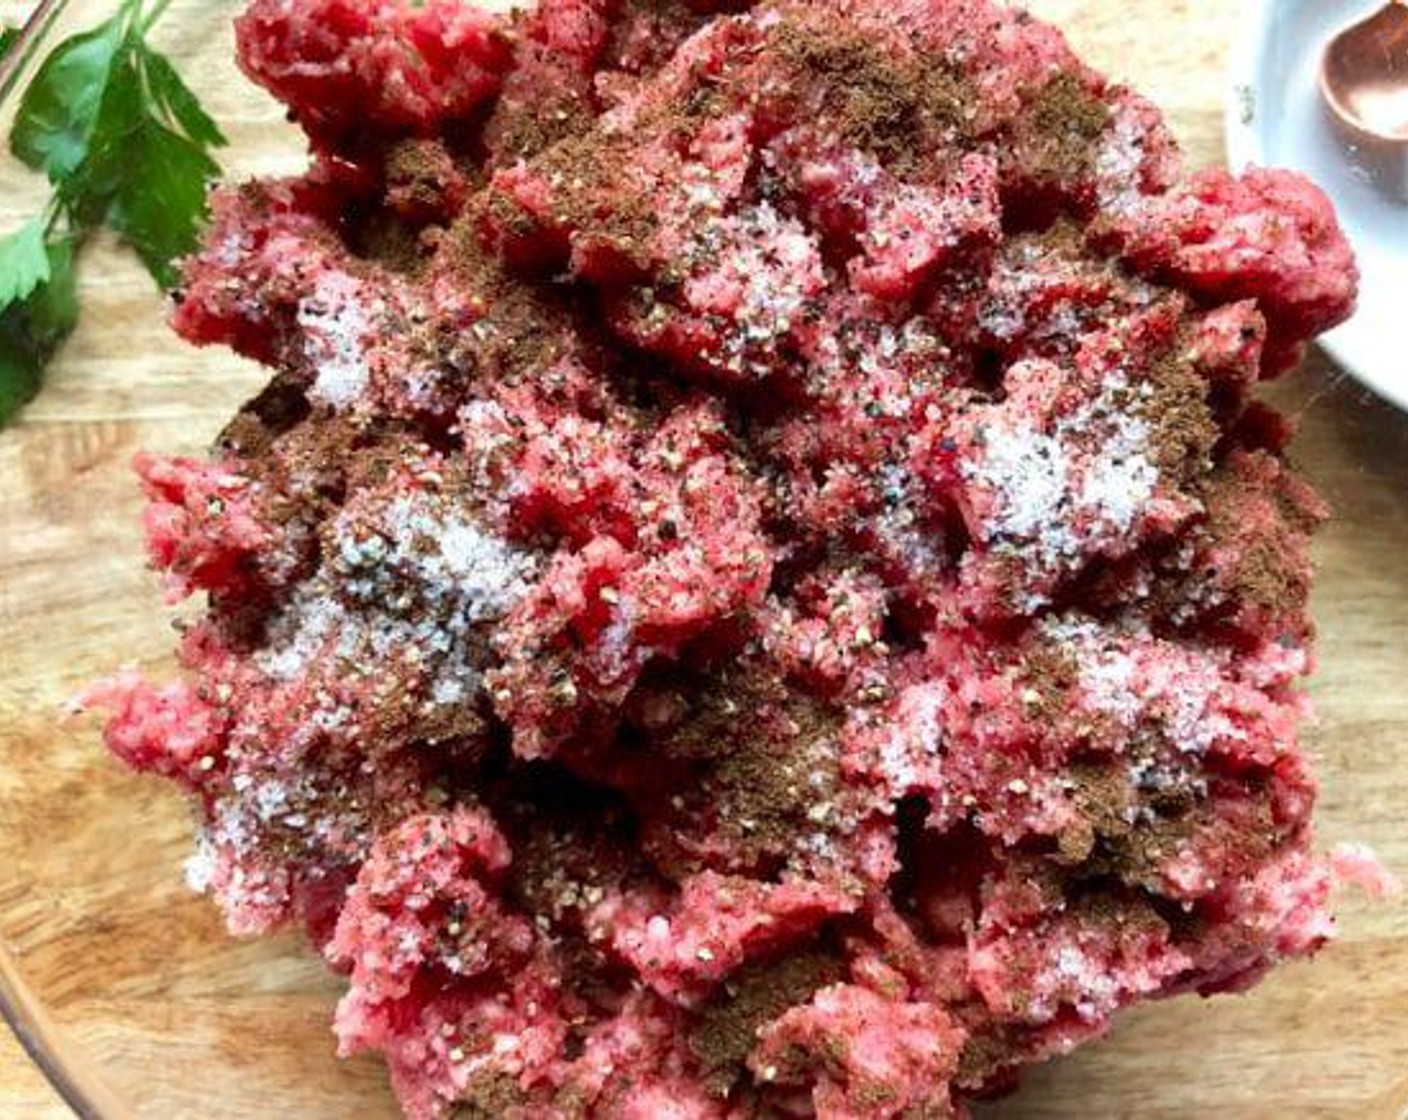 step 1 Using your hands, gently mix 80/20 Lean Ground Beef (1 lb) with Fine Sea Salt (1 tsp), Freshly Ground Black Pepper (1/2 tsp), and Ground Allspice (1/4 tsp).